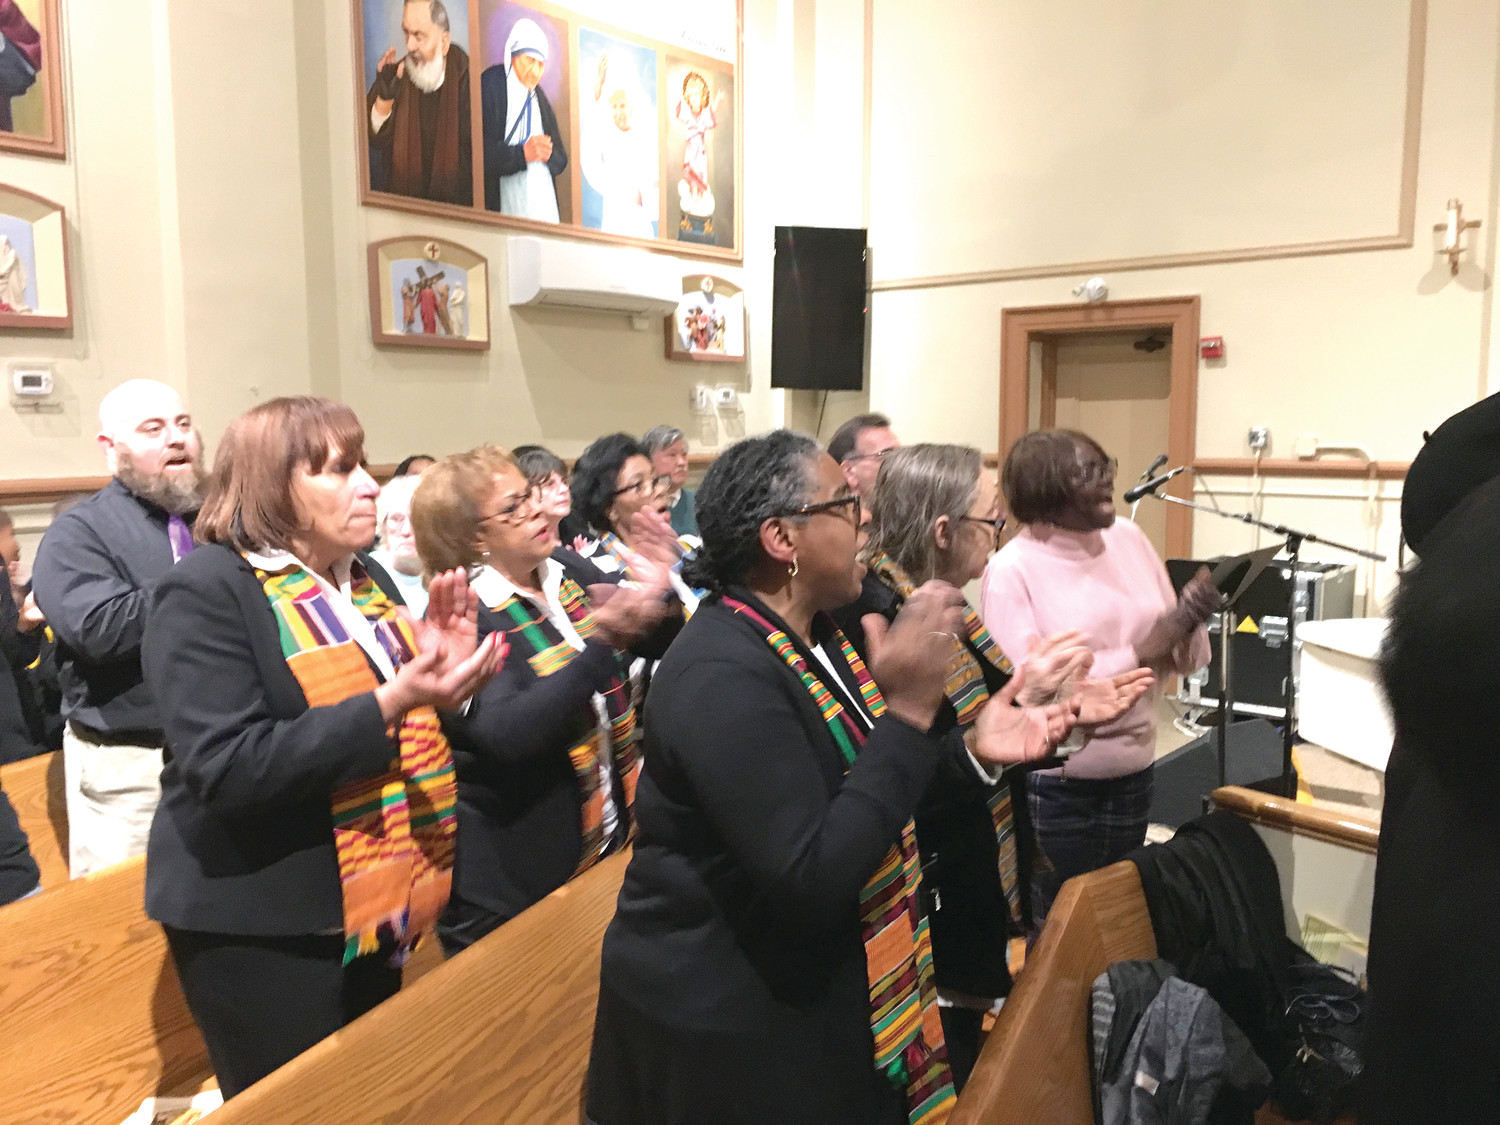 The Holy Name of Jesus Gospel Choir performs a song during the Martin Luther King celebration.